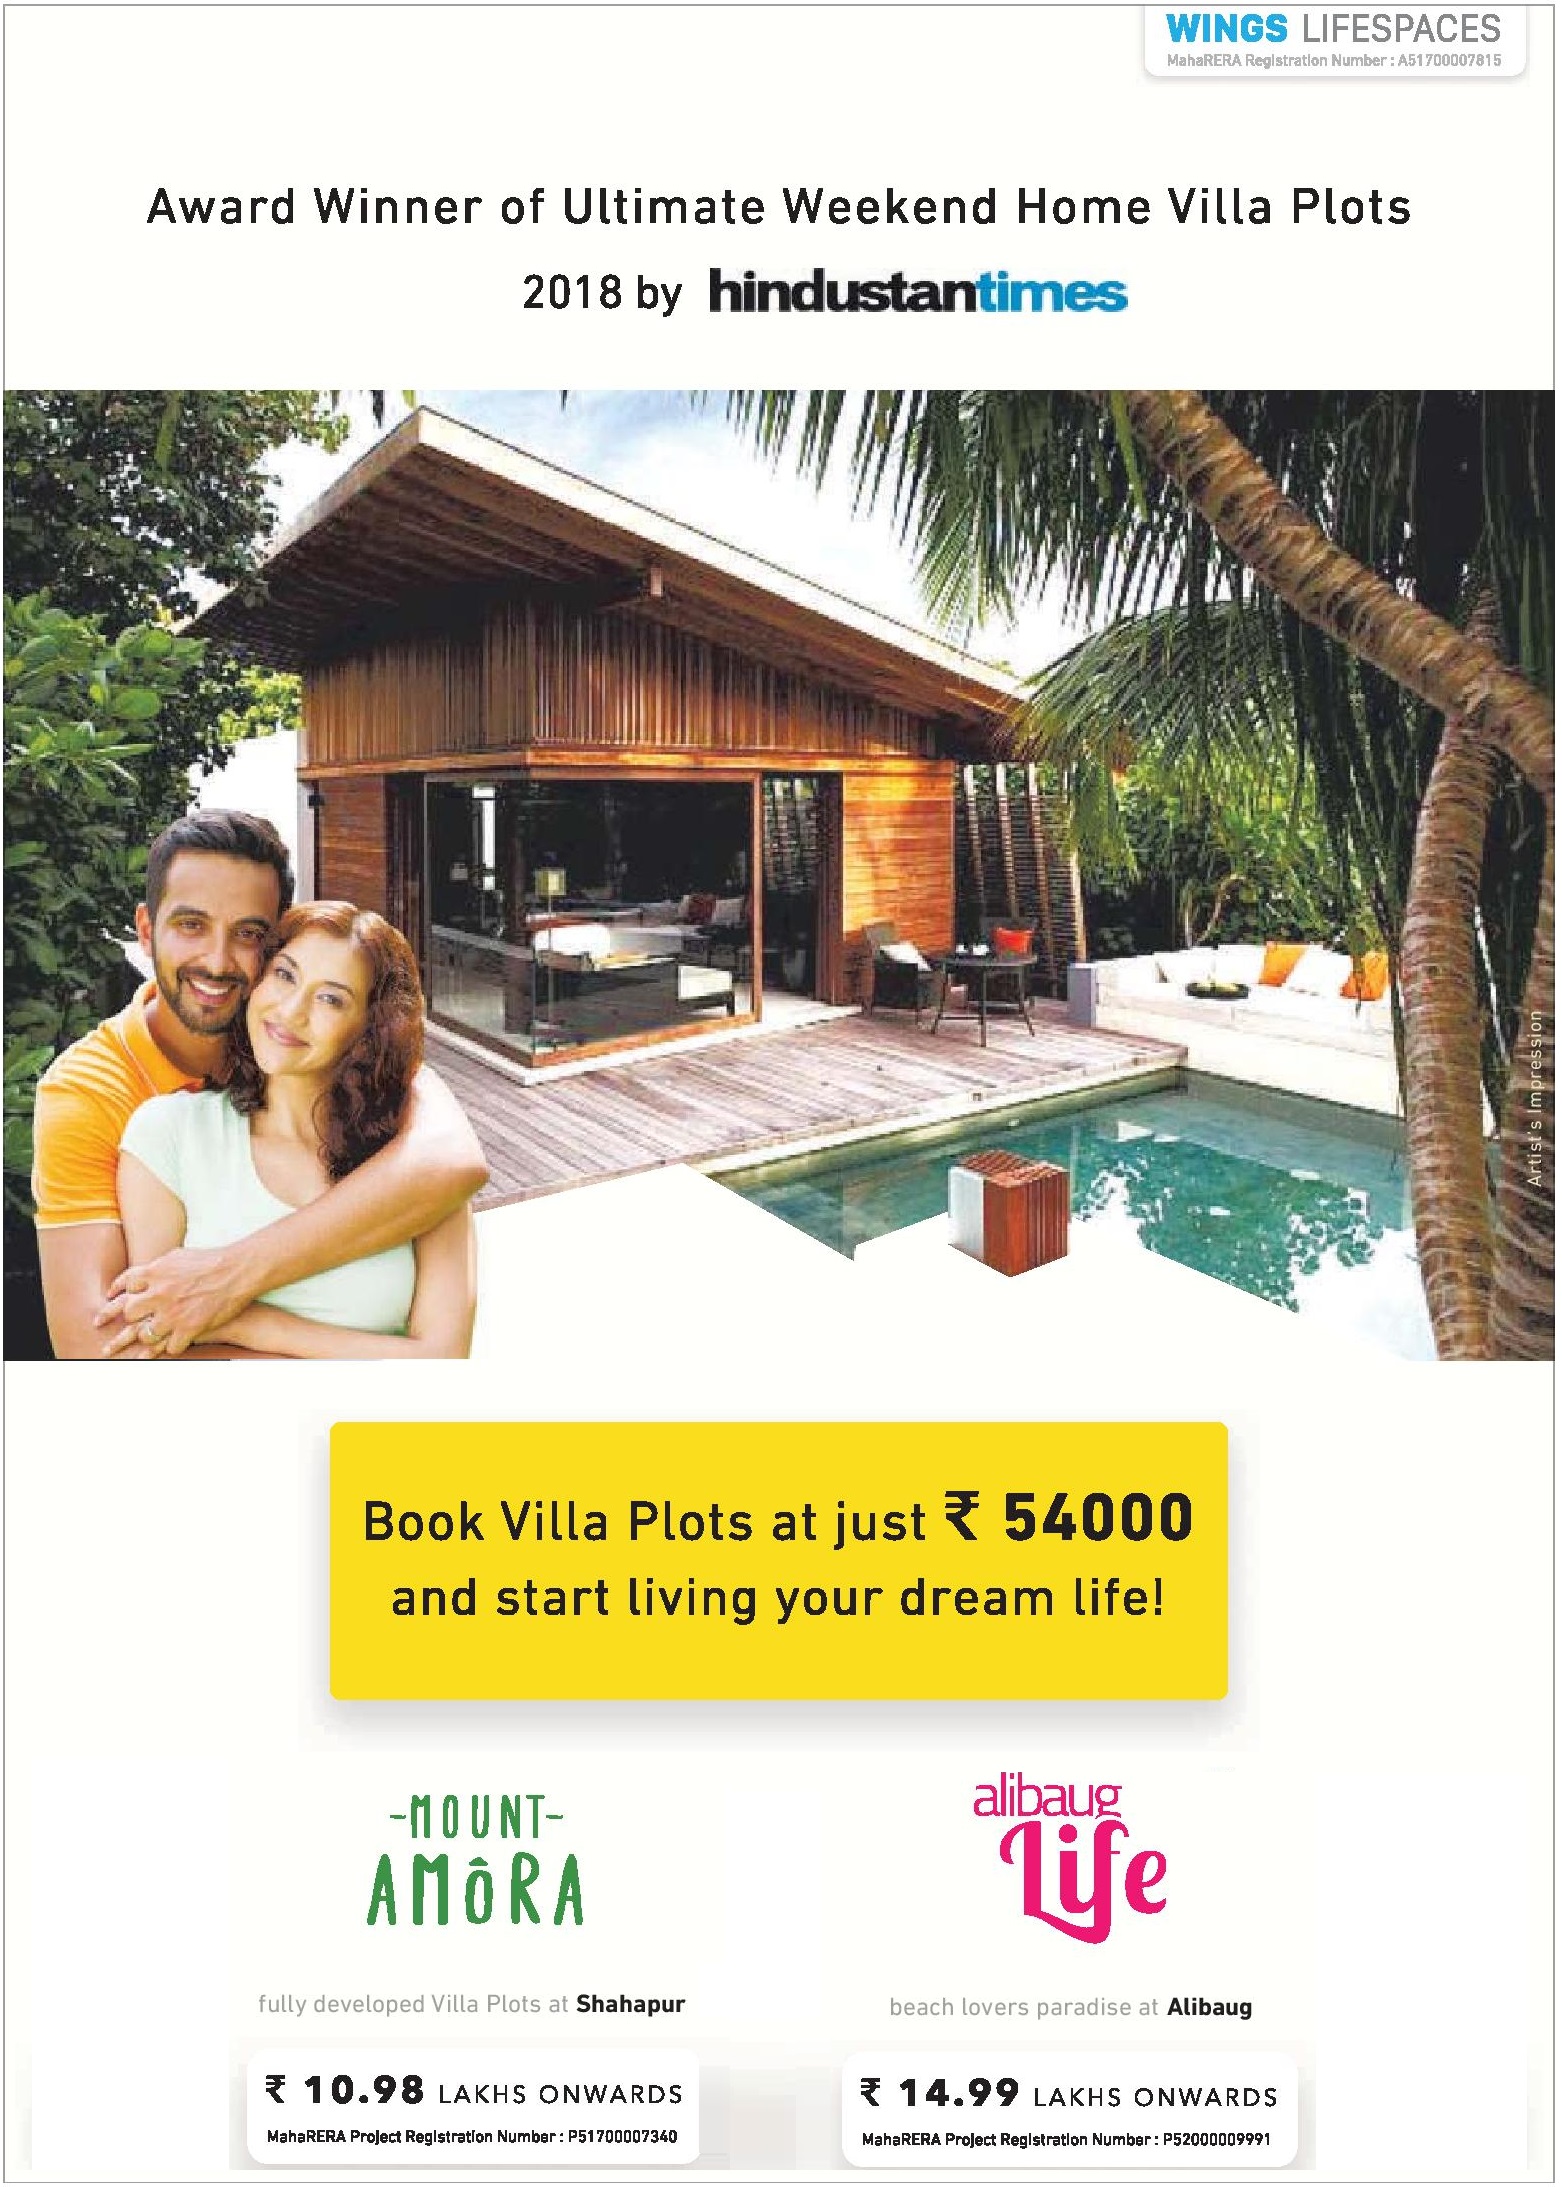 Book villa plots at Rs. 54000 & start living your dream life at Wings Project in Mumbai